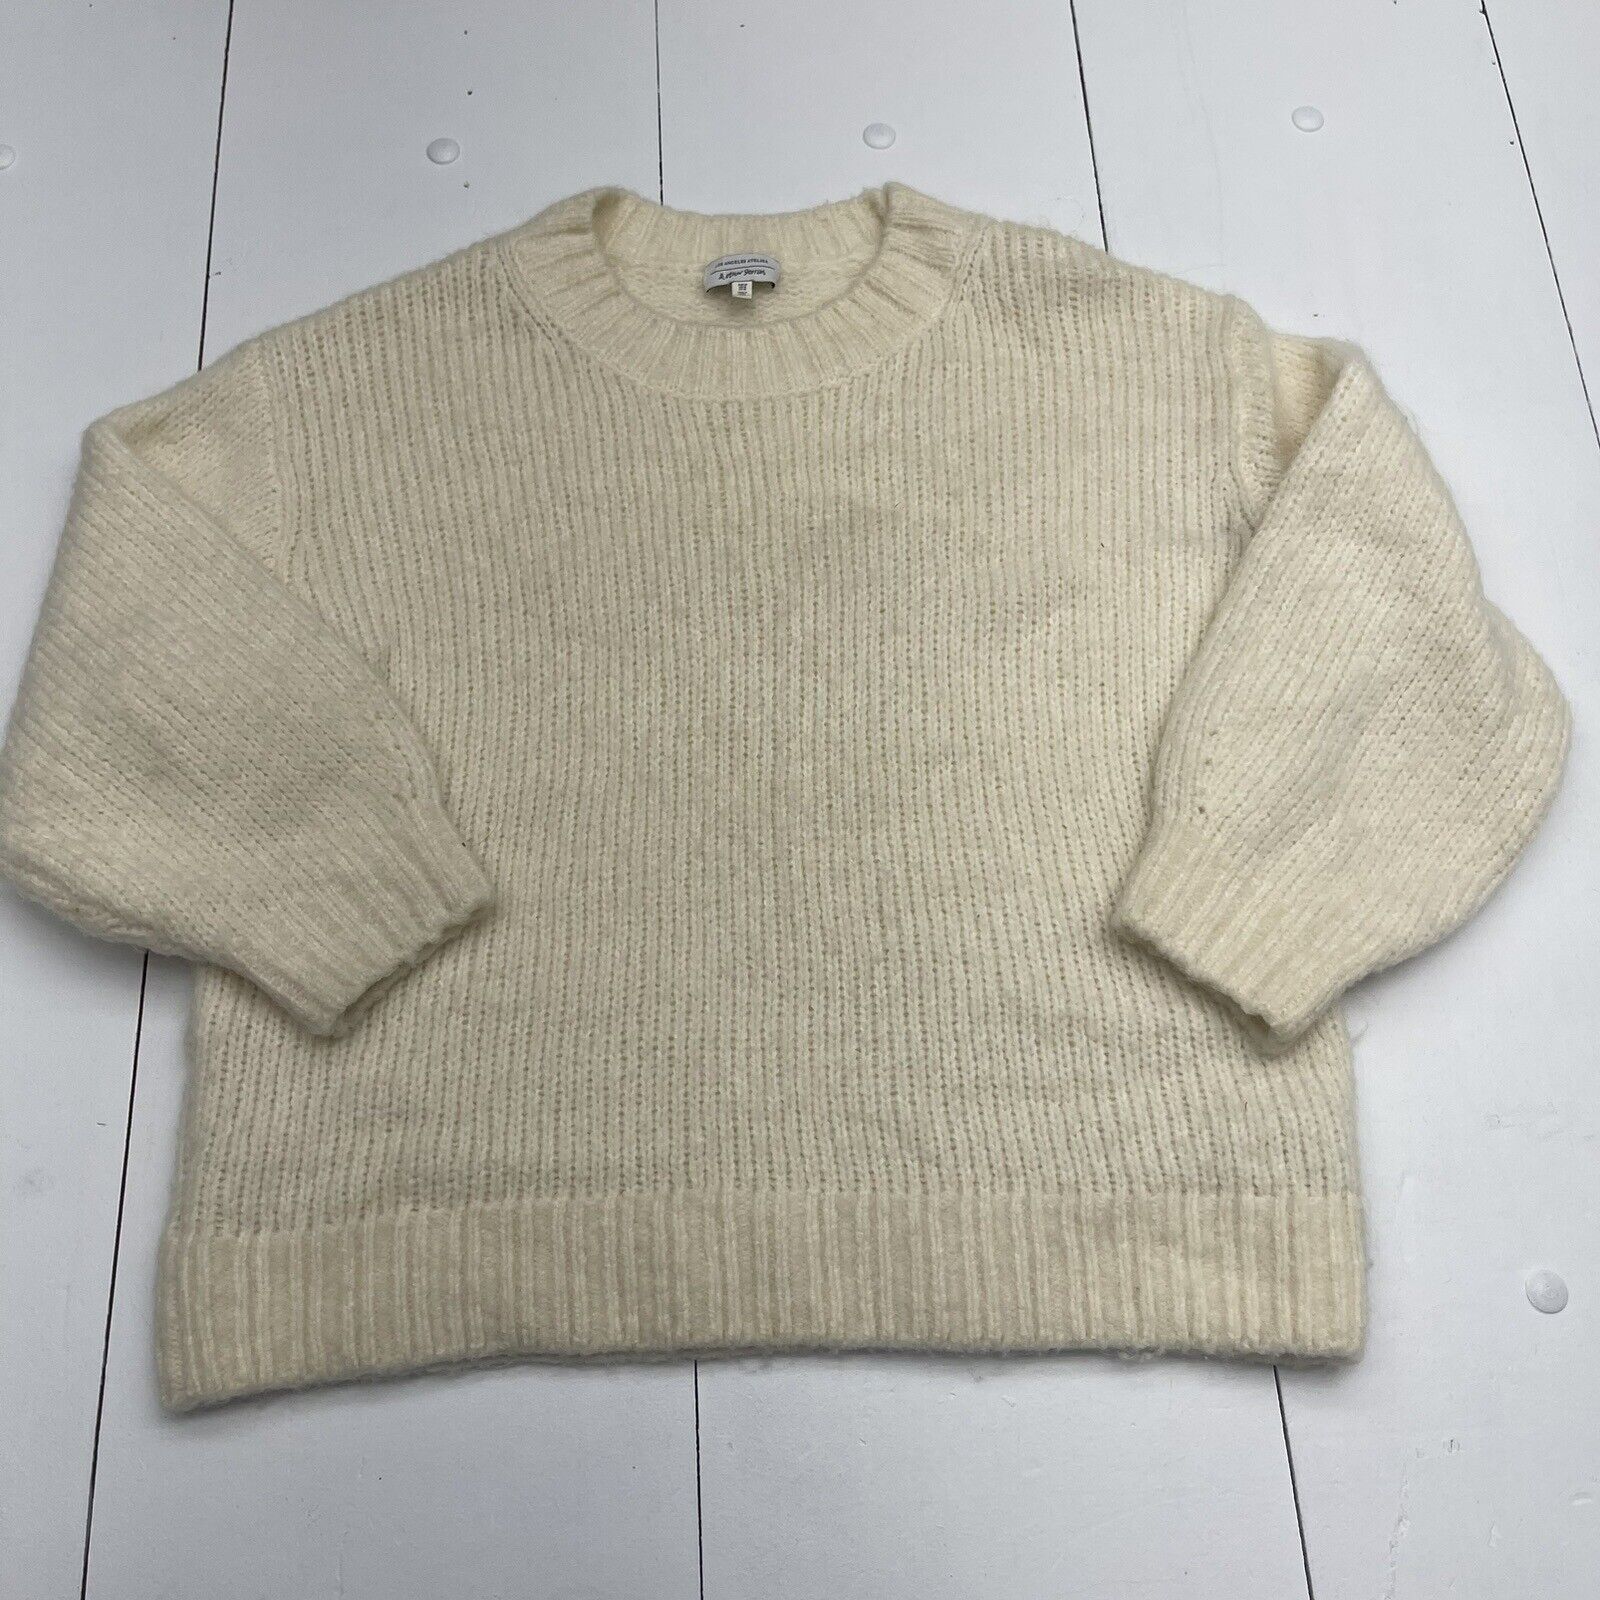 & Other Stories Ivory Knit Sweater Women’s Size Medium